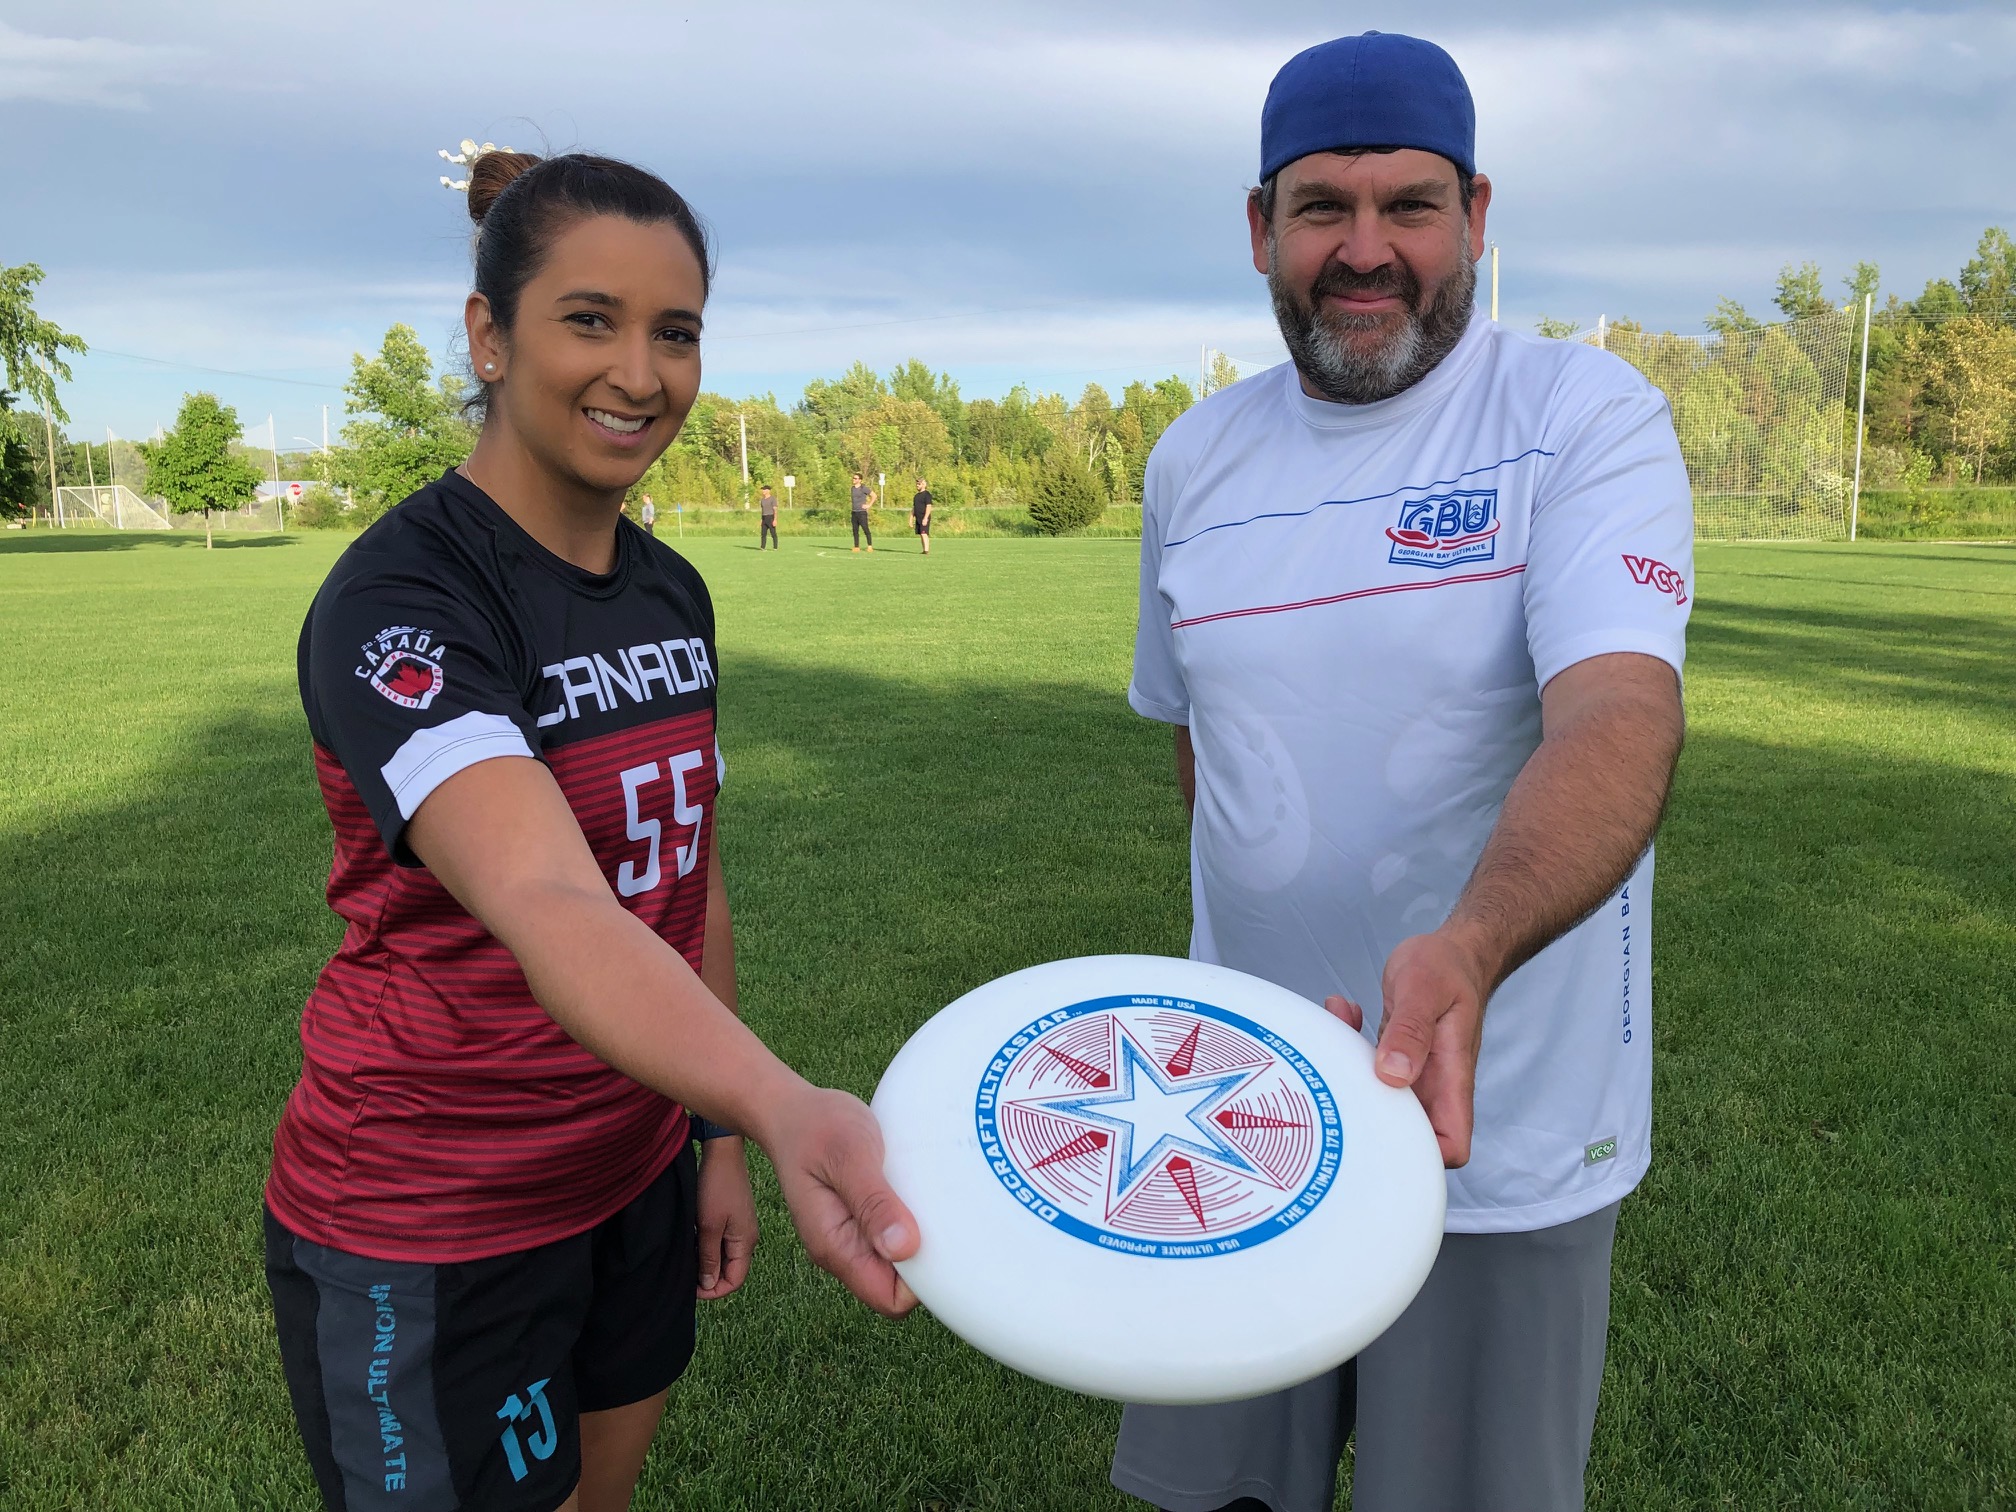 Two athletes headed to Ultimate world games - Barrie News